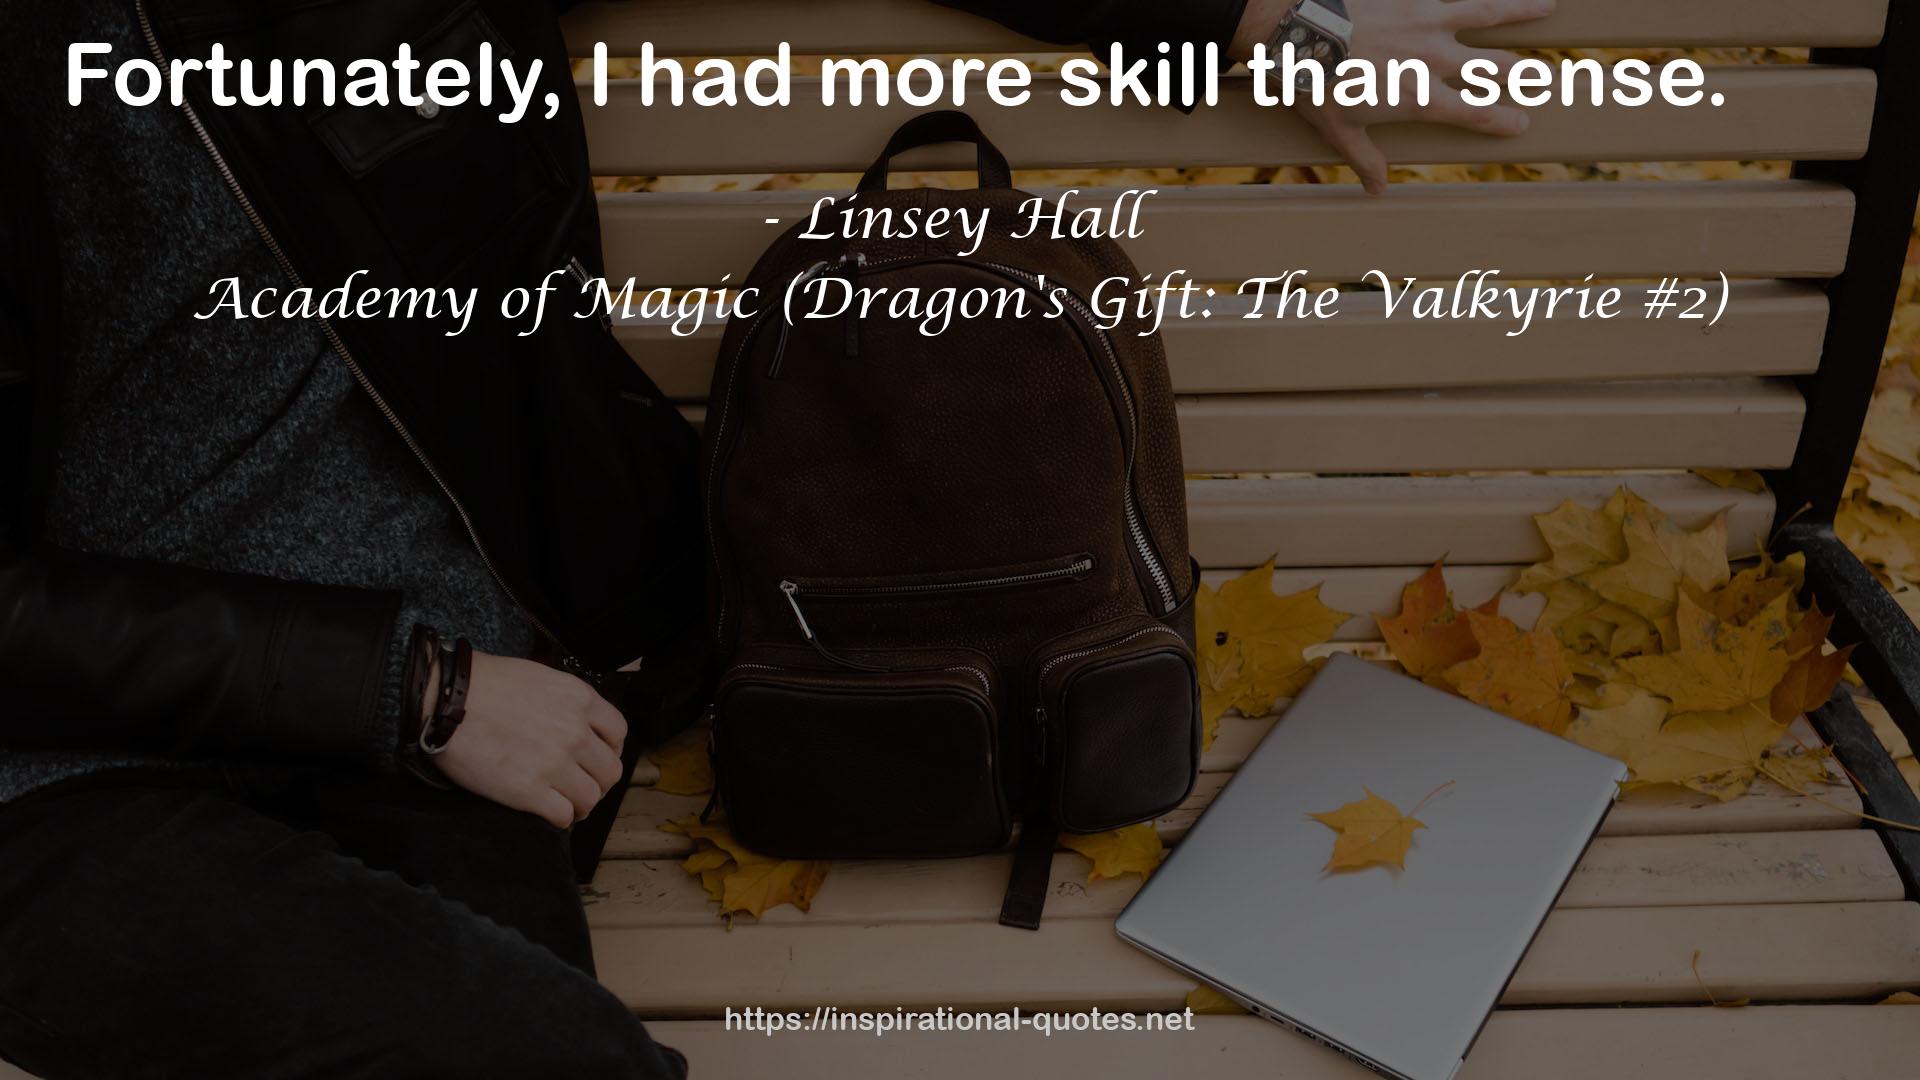 Academy of Magic (Dragon's Gift: The Valkyrie #2) QUOTES